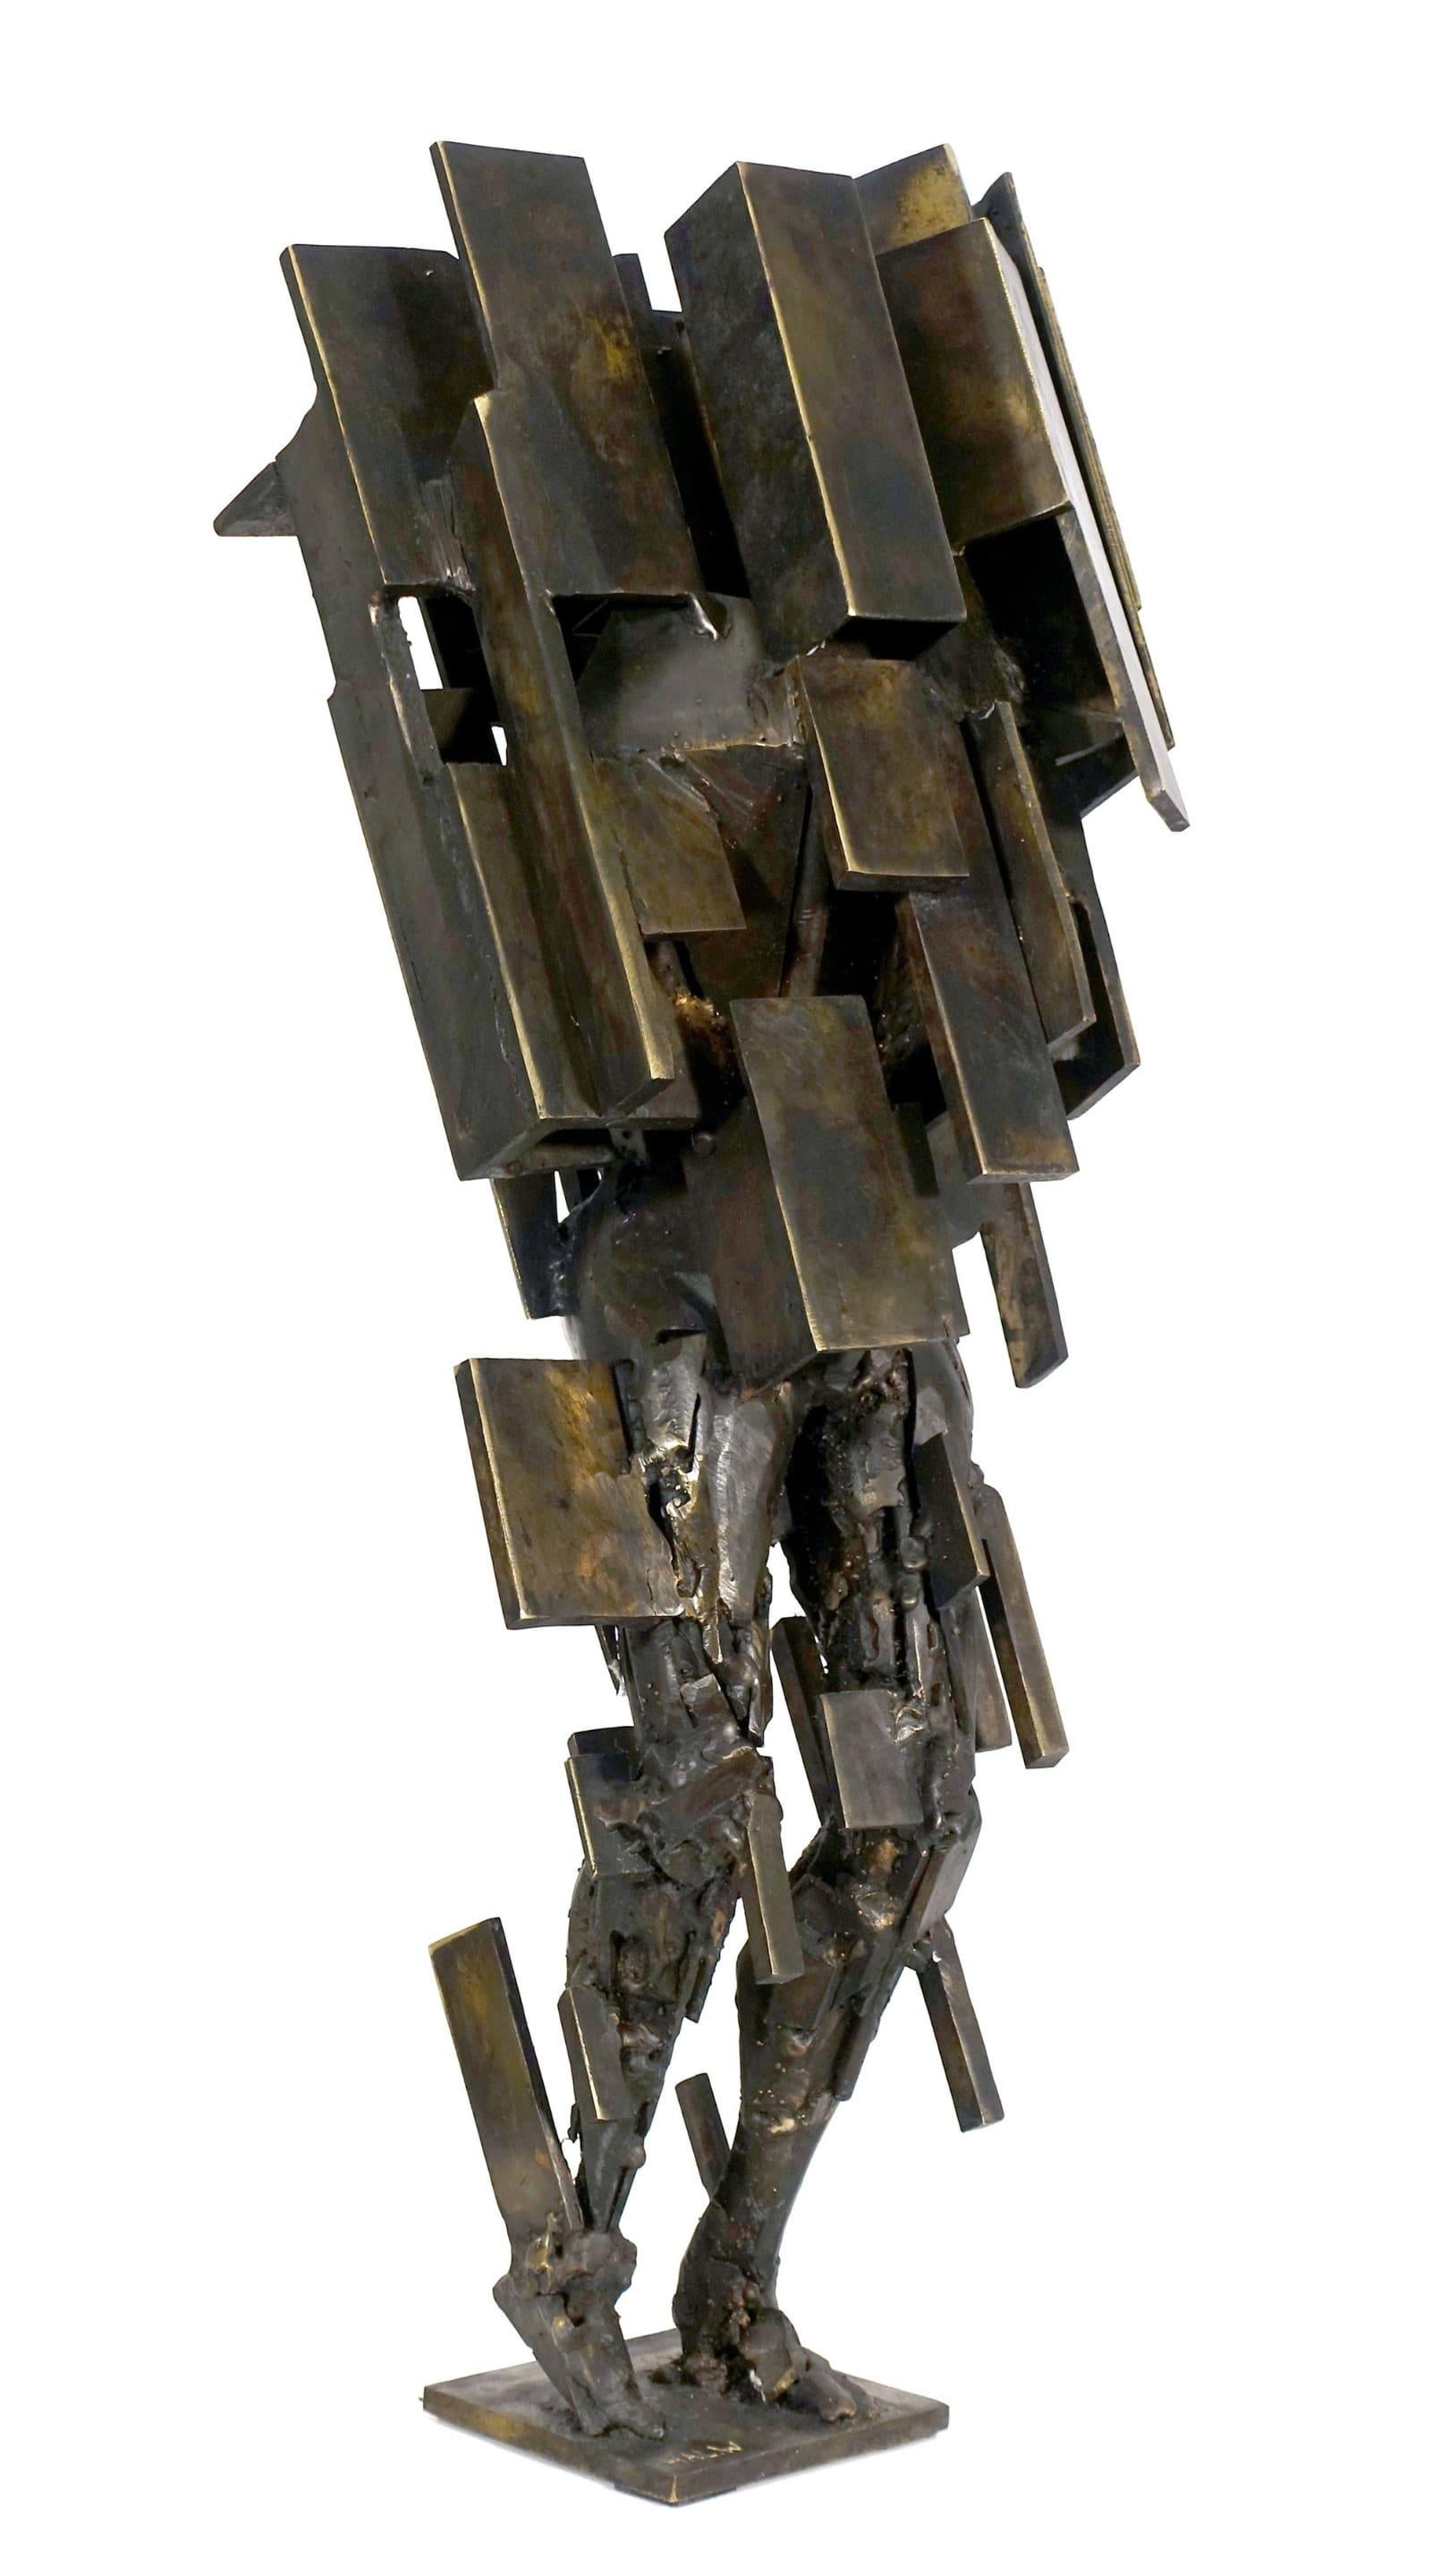 Halliday Avray Wilson uses traditional sculpting methods and materials, such as bronze, brass and steel, together with innovative techniques to create a fascinating and unique body of work. 
His recent output is characterized by a fascination with